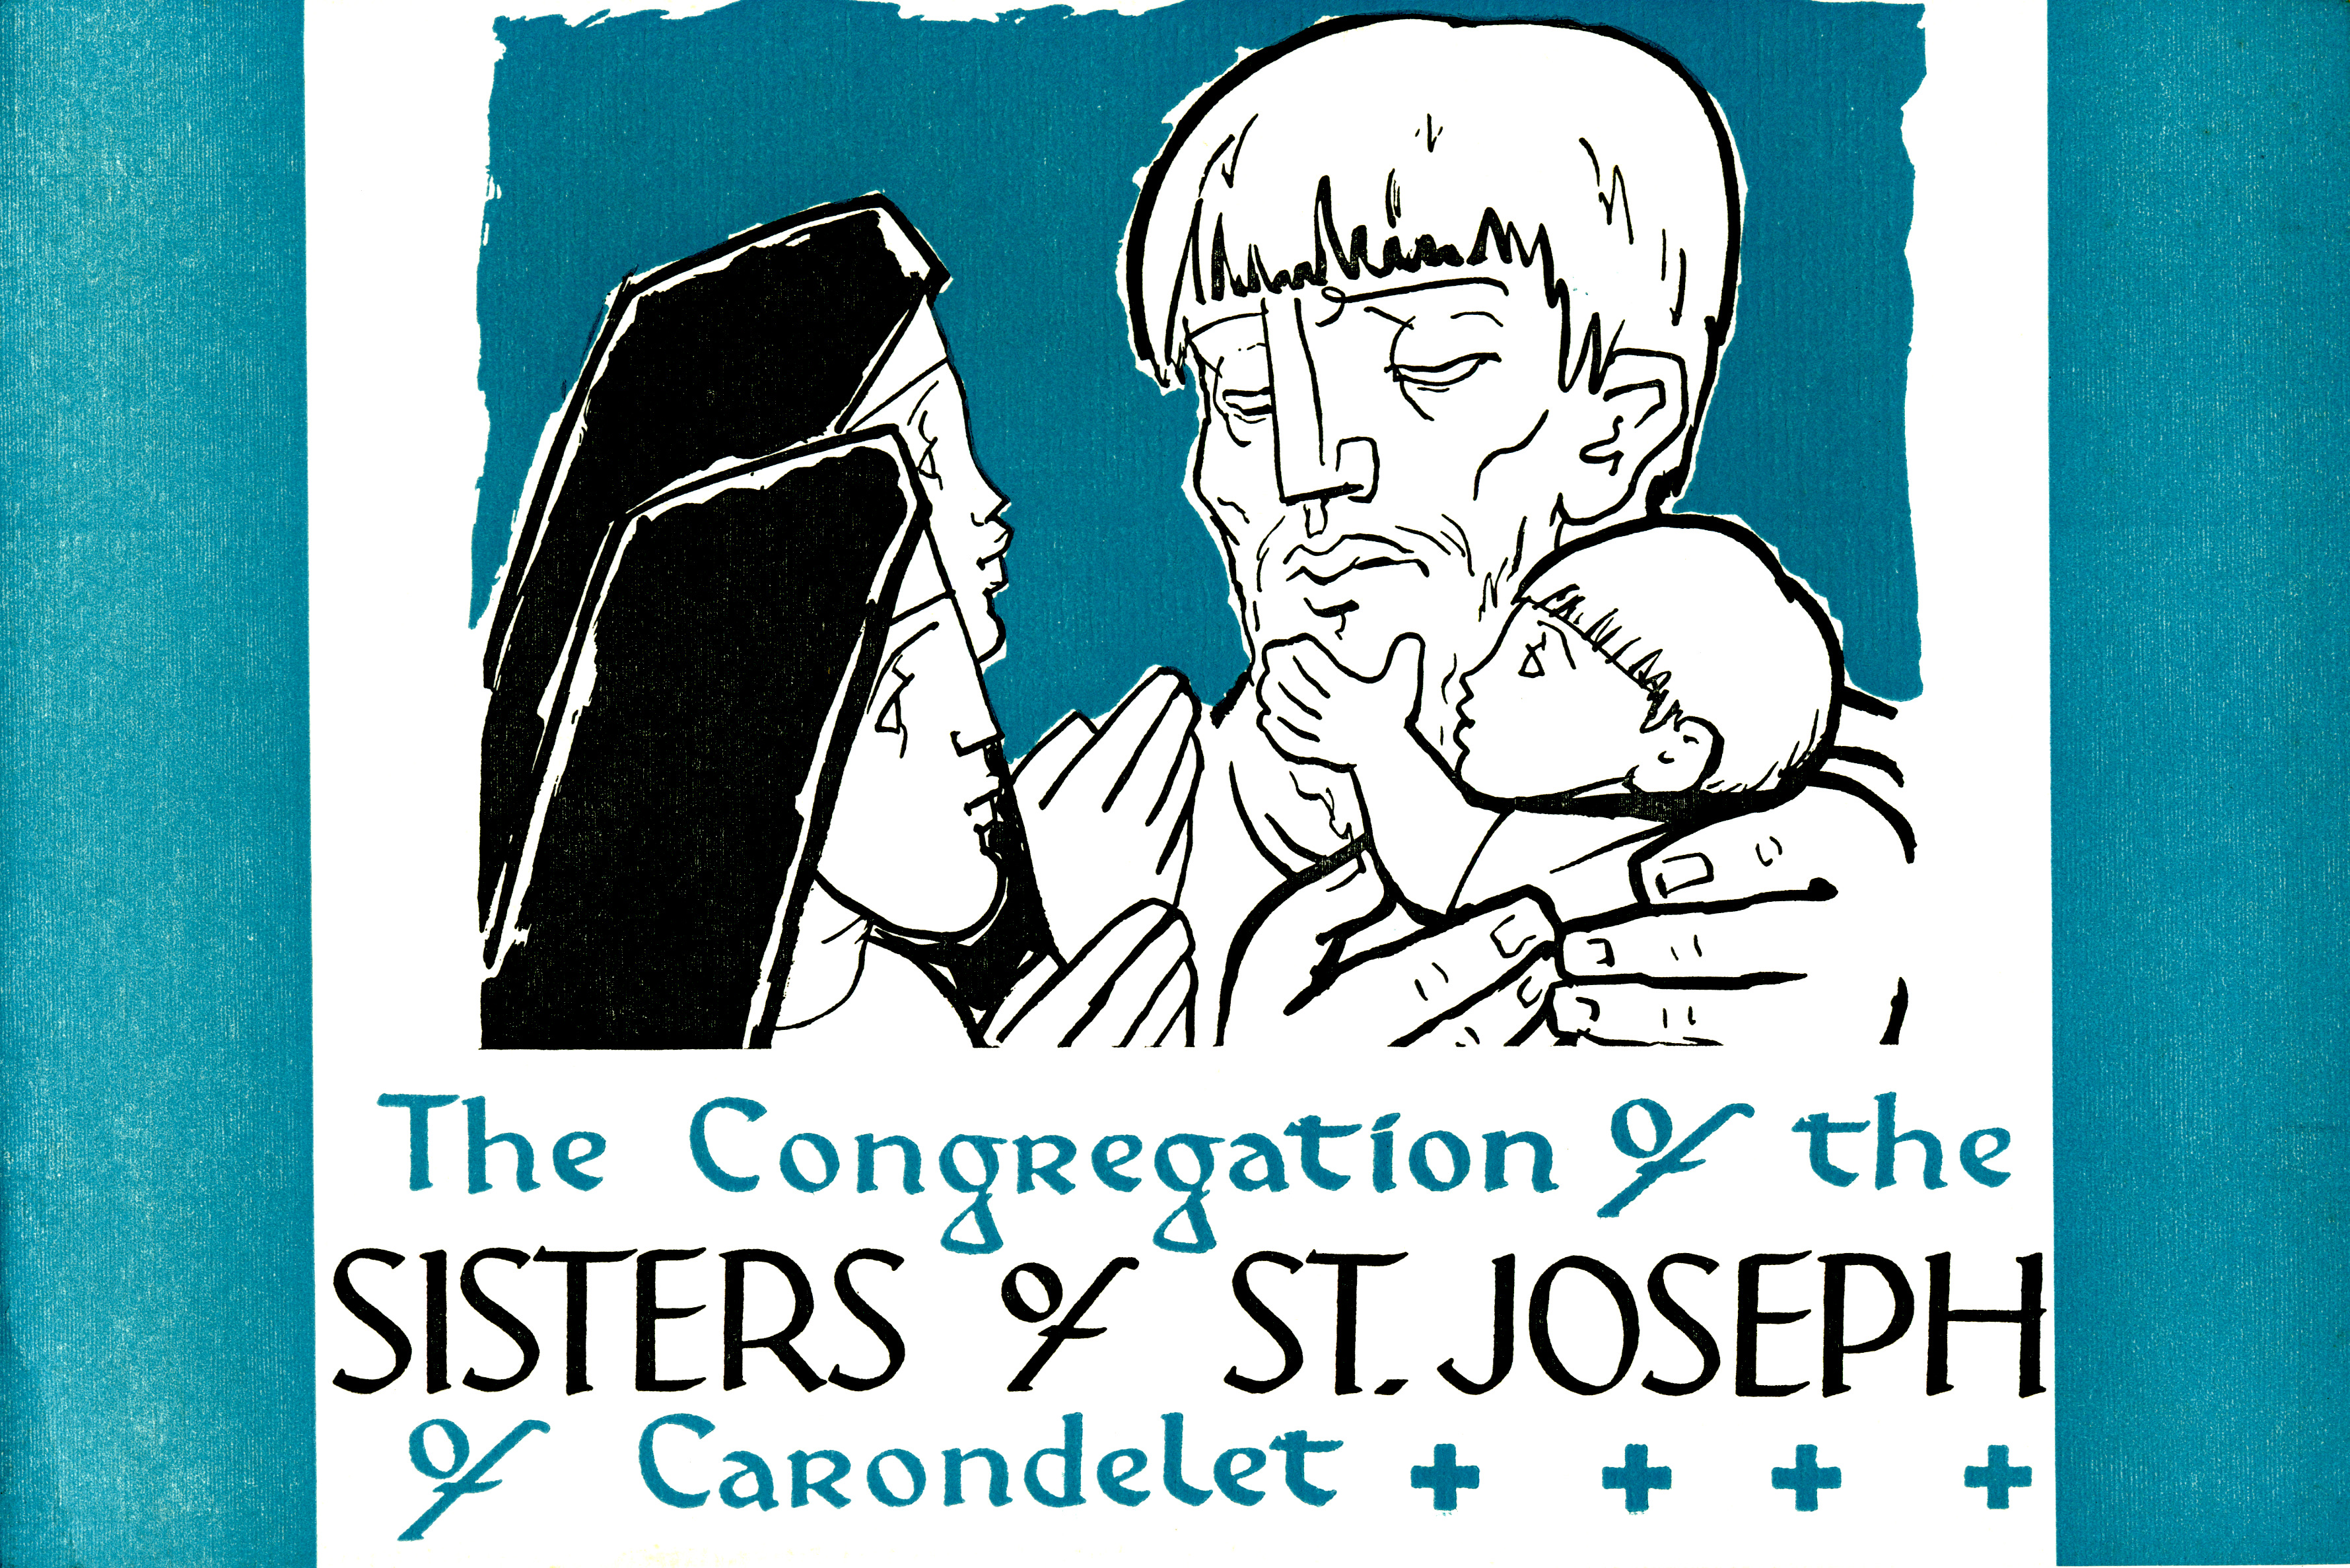 Cover for 'The Congregation of the Sisters of St. Joseph of Carondelet'.  Jean Charlot.